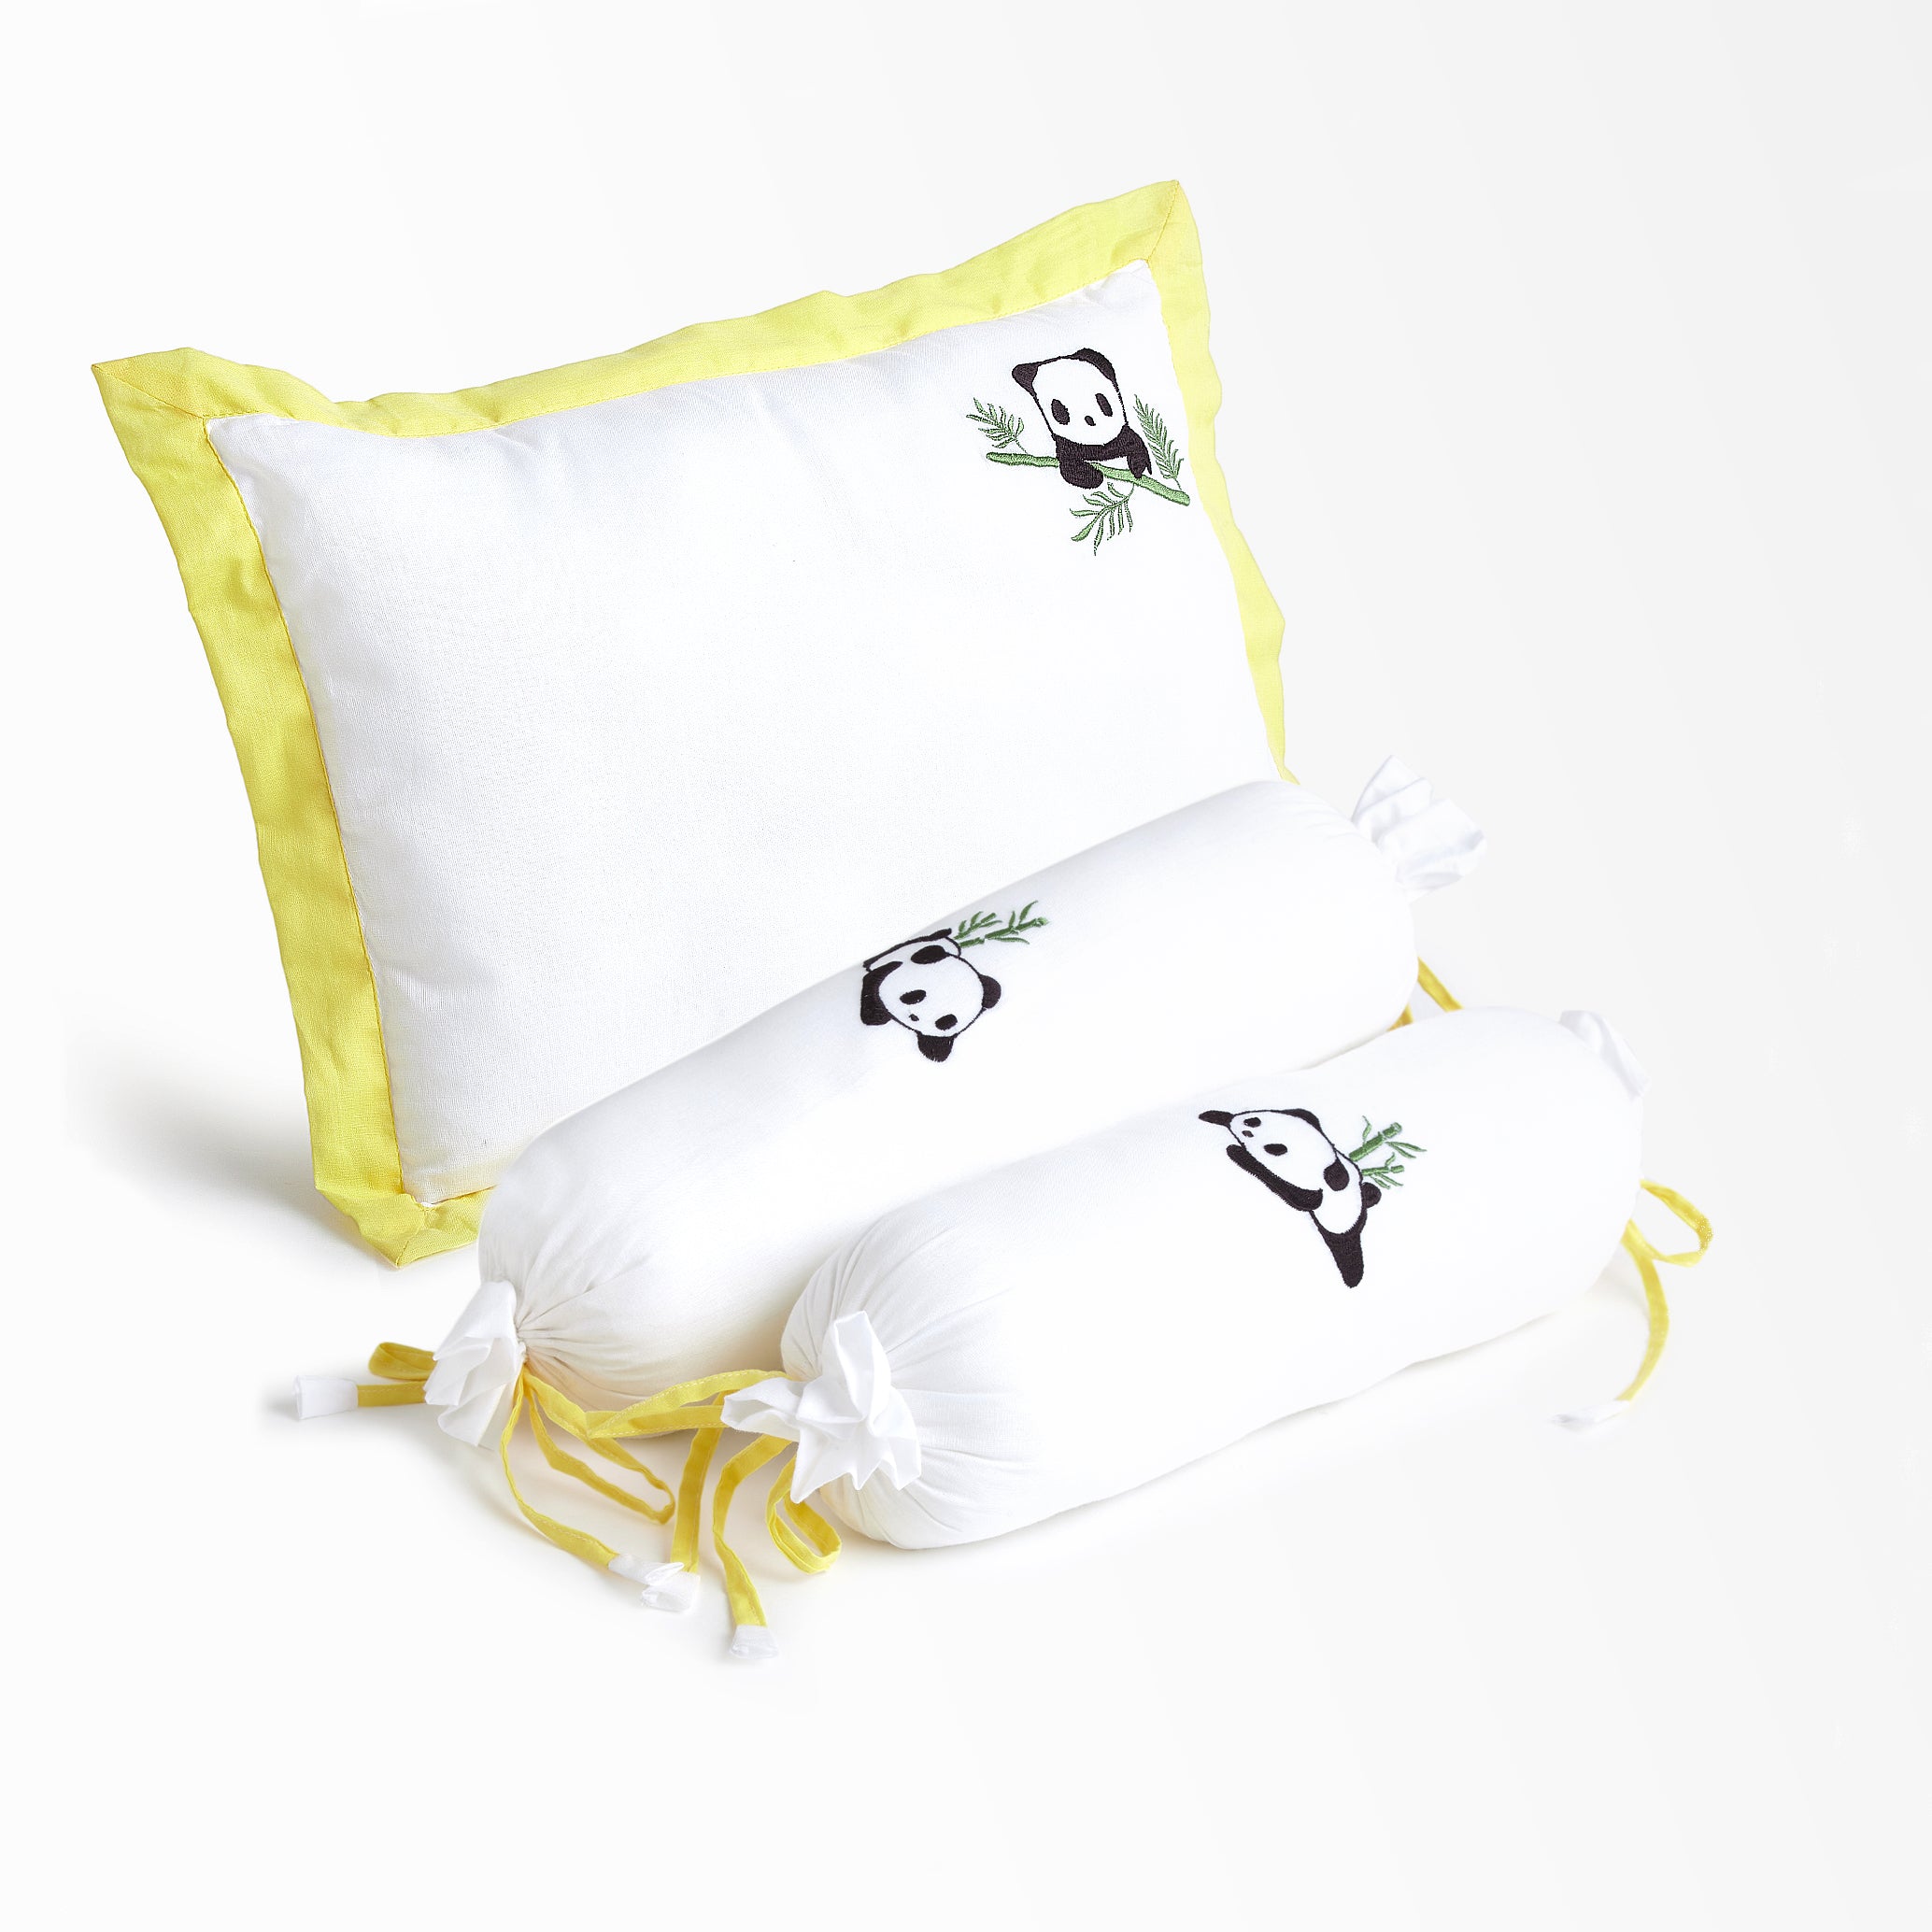 The White Cradle Cot Pillow + 2 Bolsters Set with Fillers - Organic Cotton Fabric, Protective Comfort, Softest Fiber Filling  - Yellow Panda